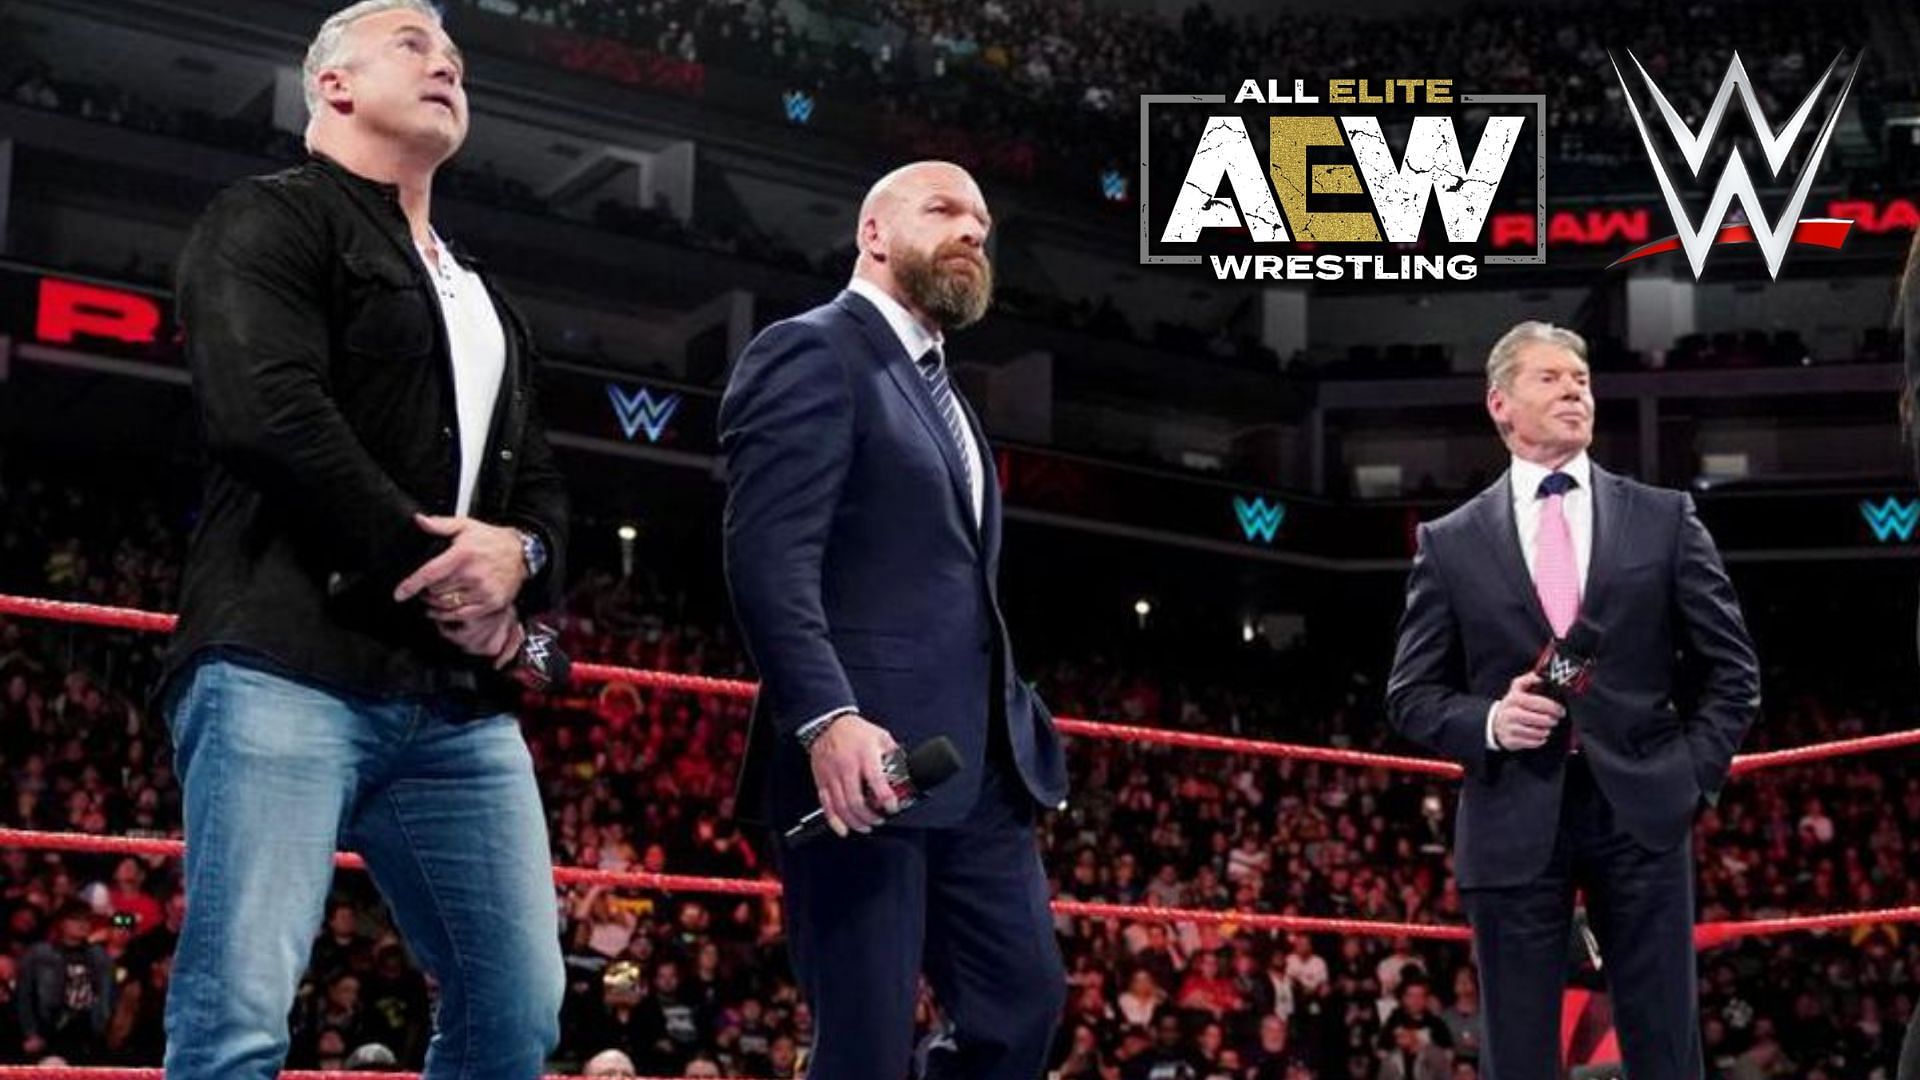 Triple H had once attacked an AEW star during a storyline